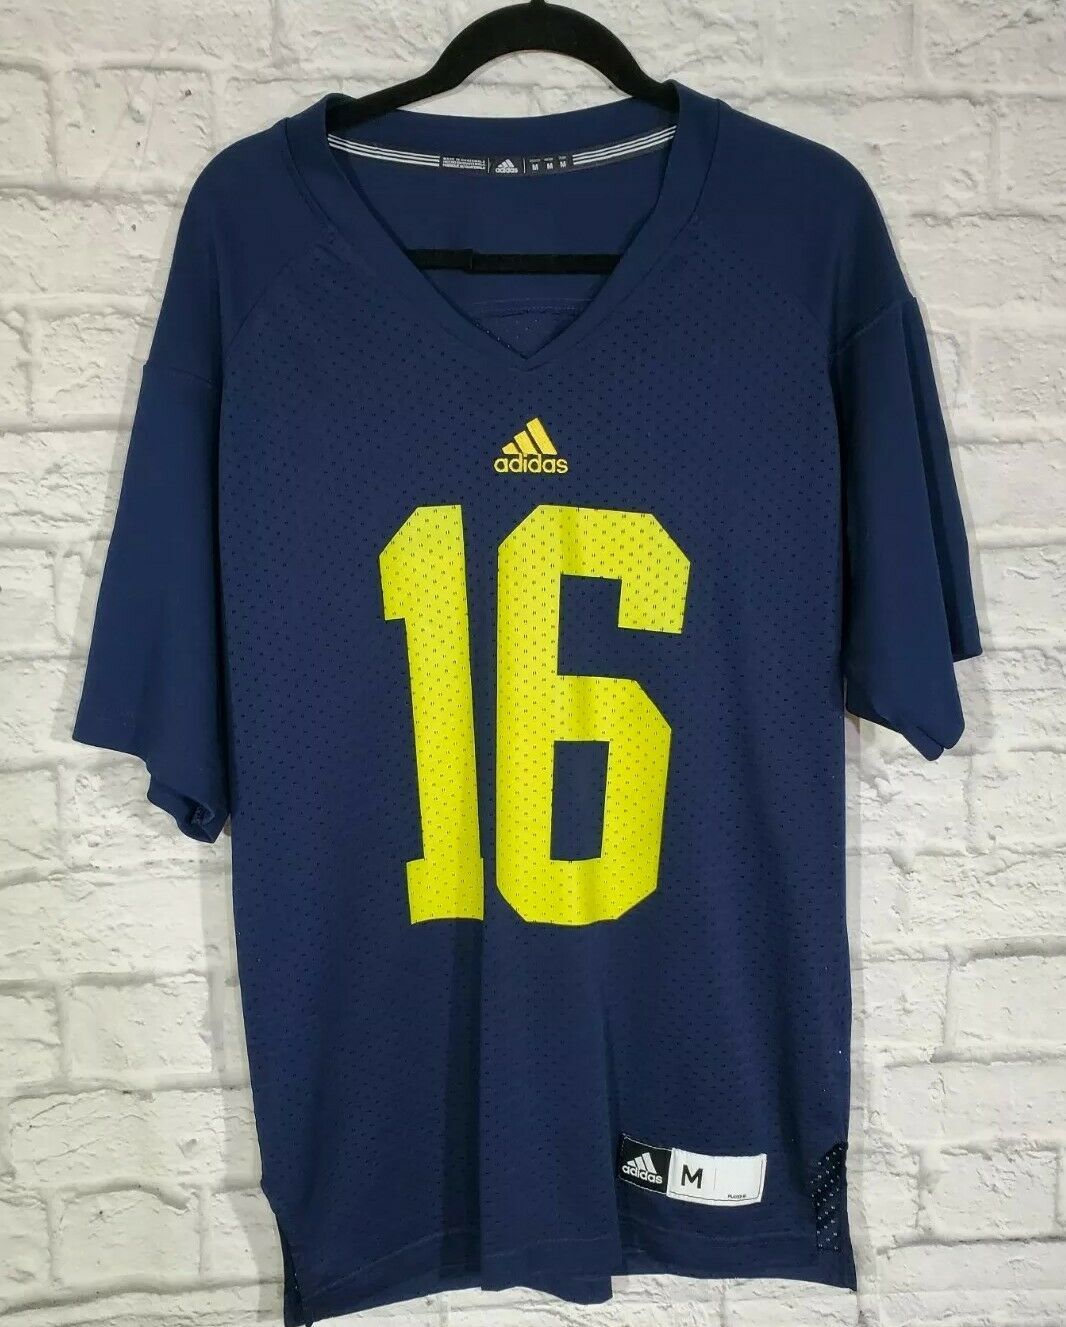 Primary image for Adidas Jersey Size M Mens Blue Michigan V Neck Short Sleeve Shirt